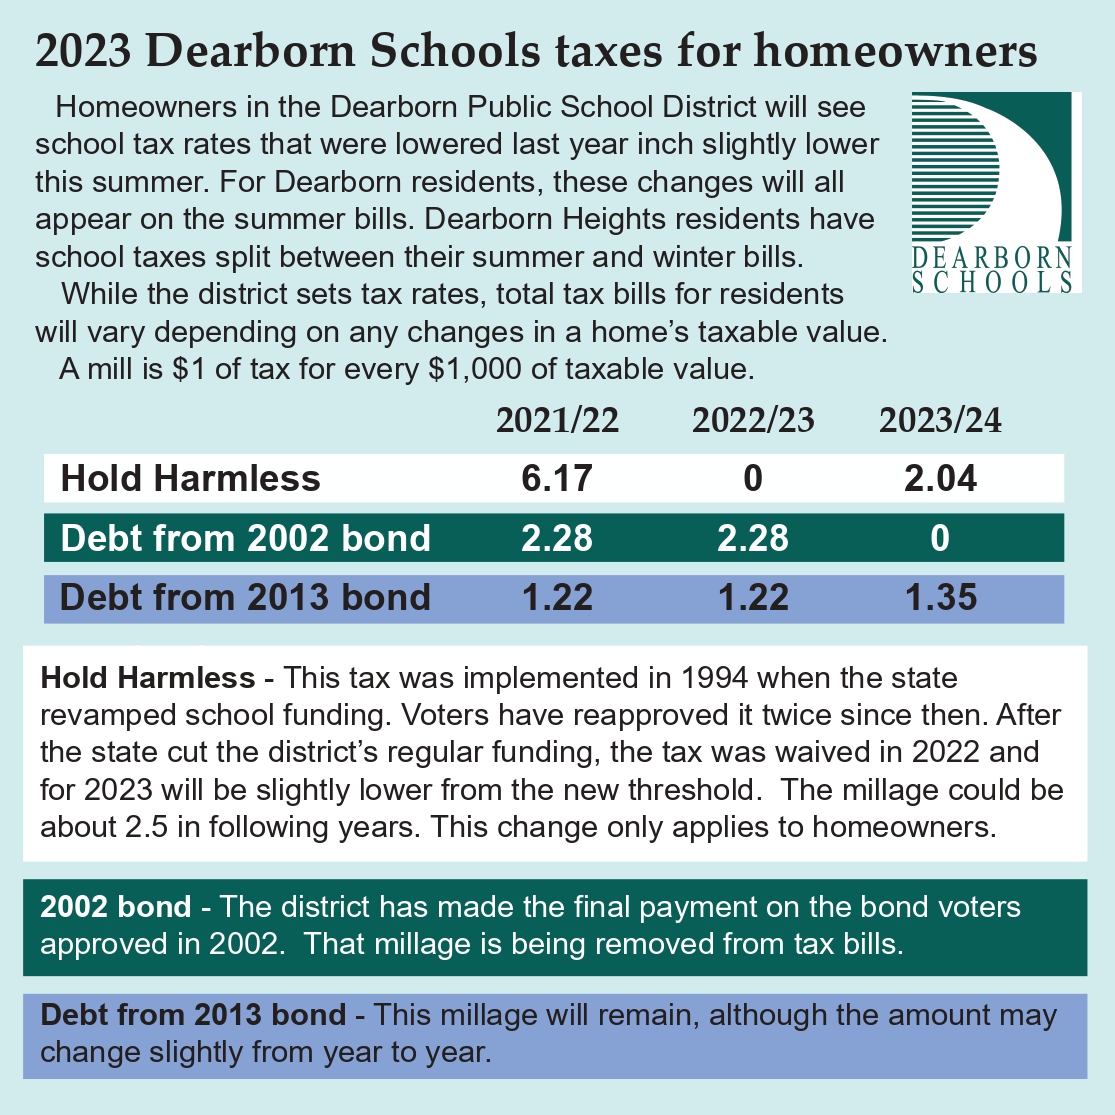 2023 Dearborn Schools taxes for homeowners Homeowners in the Dearborn Public School District will see school tax rates that were lowered last year inch slightly lower this summer. For Dearborn residents, these changes will all appear on the summer bills. Dearborn Heights residents have school taxes split evenly between their summer and winter bills. While the district tax rates have declined, total tax bills for residents will vary depending on any changes in a home's taxable value. A mill is $1 of tax for every $1,000 of taxable value. Hold Harmless 2021/22 - 6.17 mills, 2022/23 - 0 mill, 2023/24 2.04 mills Debt from 2002 bond - 2021/22 - 2.28 mill;, 2022/23 - 2.28 mills; 2023/24 - 0 mill Debt from 2013 bond - 2021/22 - 1.22 mills; 2022/23 - 1.22 mills; 2023/24 - 1.35 mills Hold Harmless - This tax was implemented in 1994 when the state revamped school funding. Voters have reapproved it twice since then. After the state cut the district's regular funding, the tax was waived in 2022 and for 2023 will be slightly lower from the new threshold. The millage could be about 2.5 in following years. This change only applies to homeowners. 2002 bond - The district has made the final payment on the bond voters approved in 2022. That millage is being removed from tax bills. Debt from 2013 bond - This millage will remain, although the amount may change slightly from year to year.